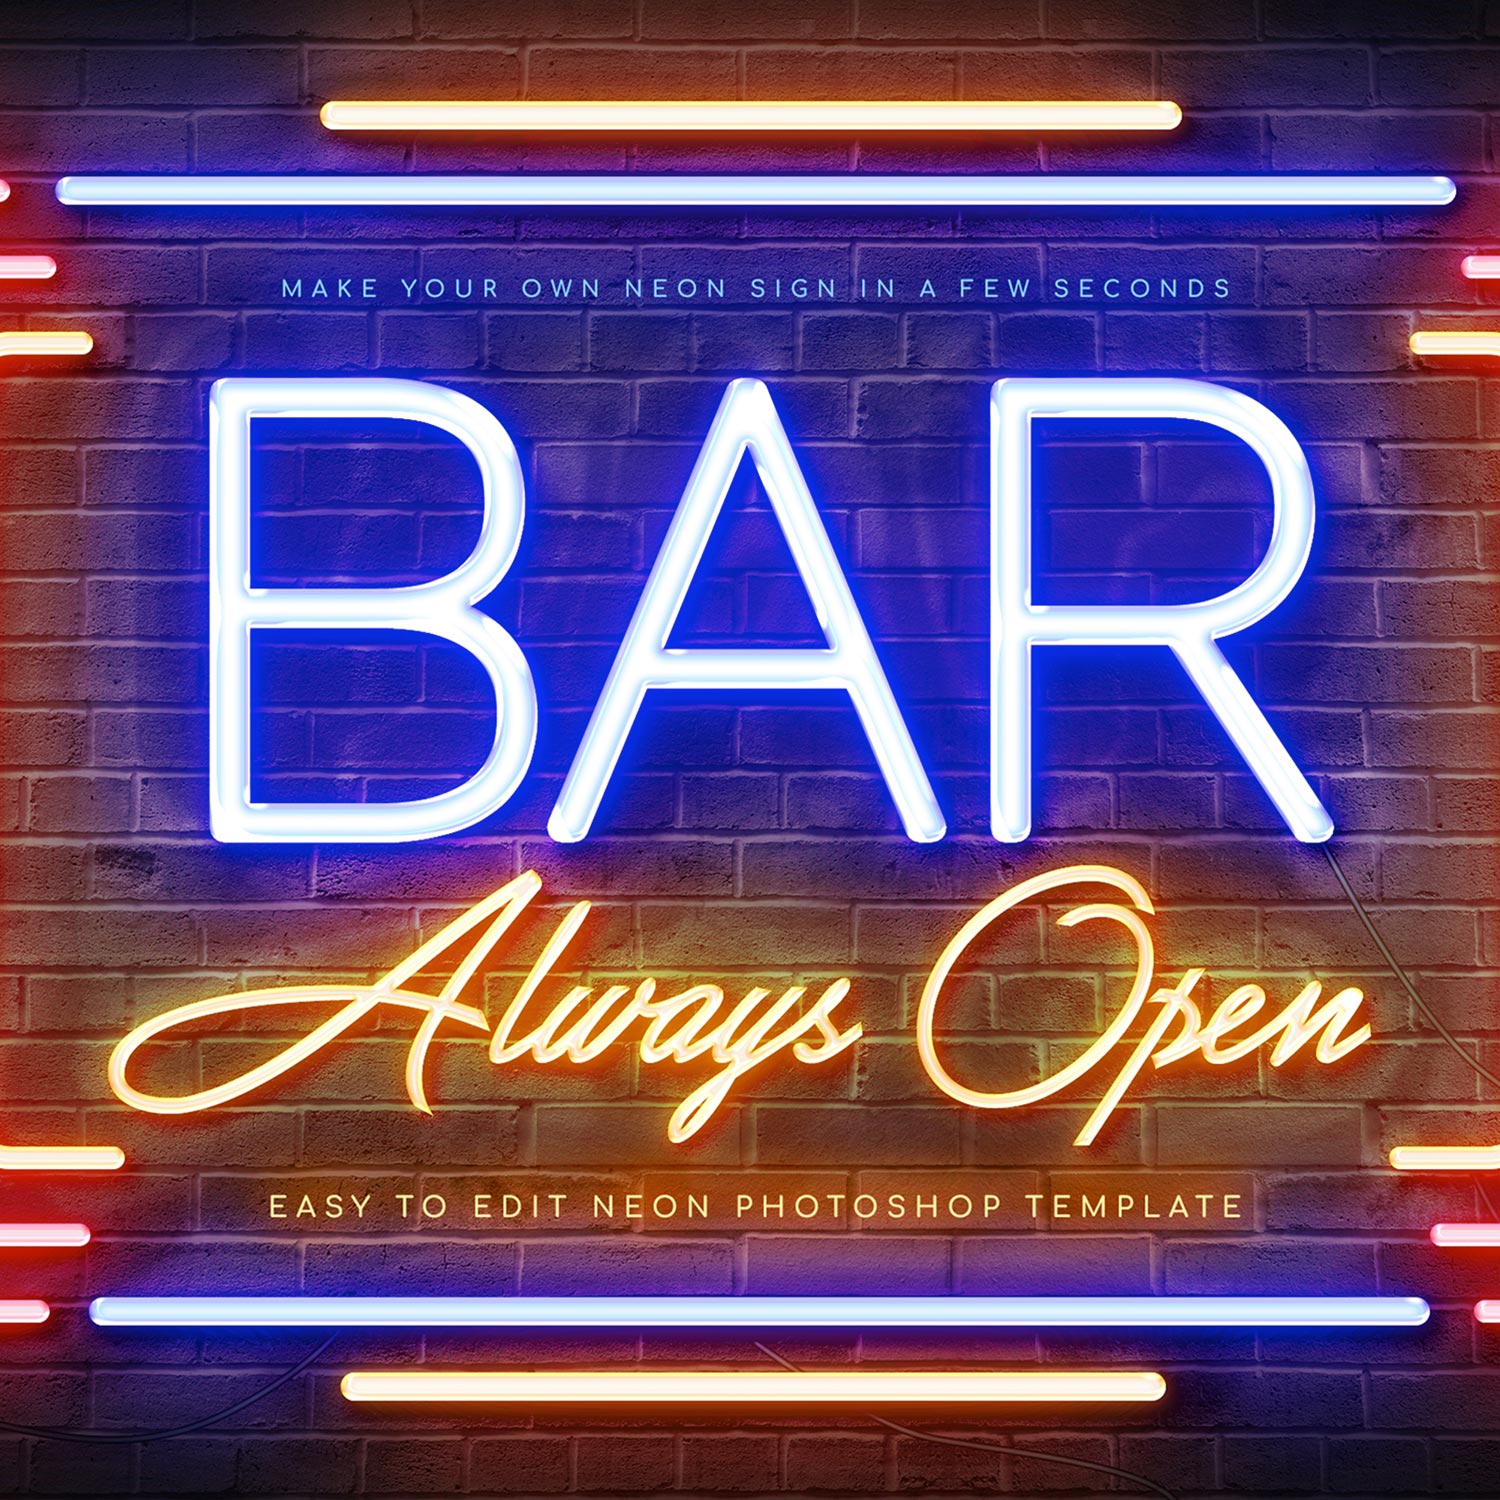 Bar Neon Sign Creator cover image.